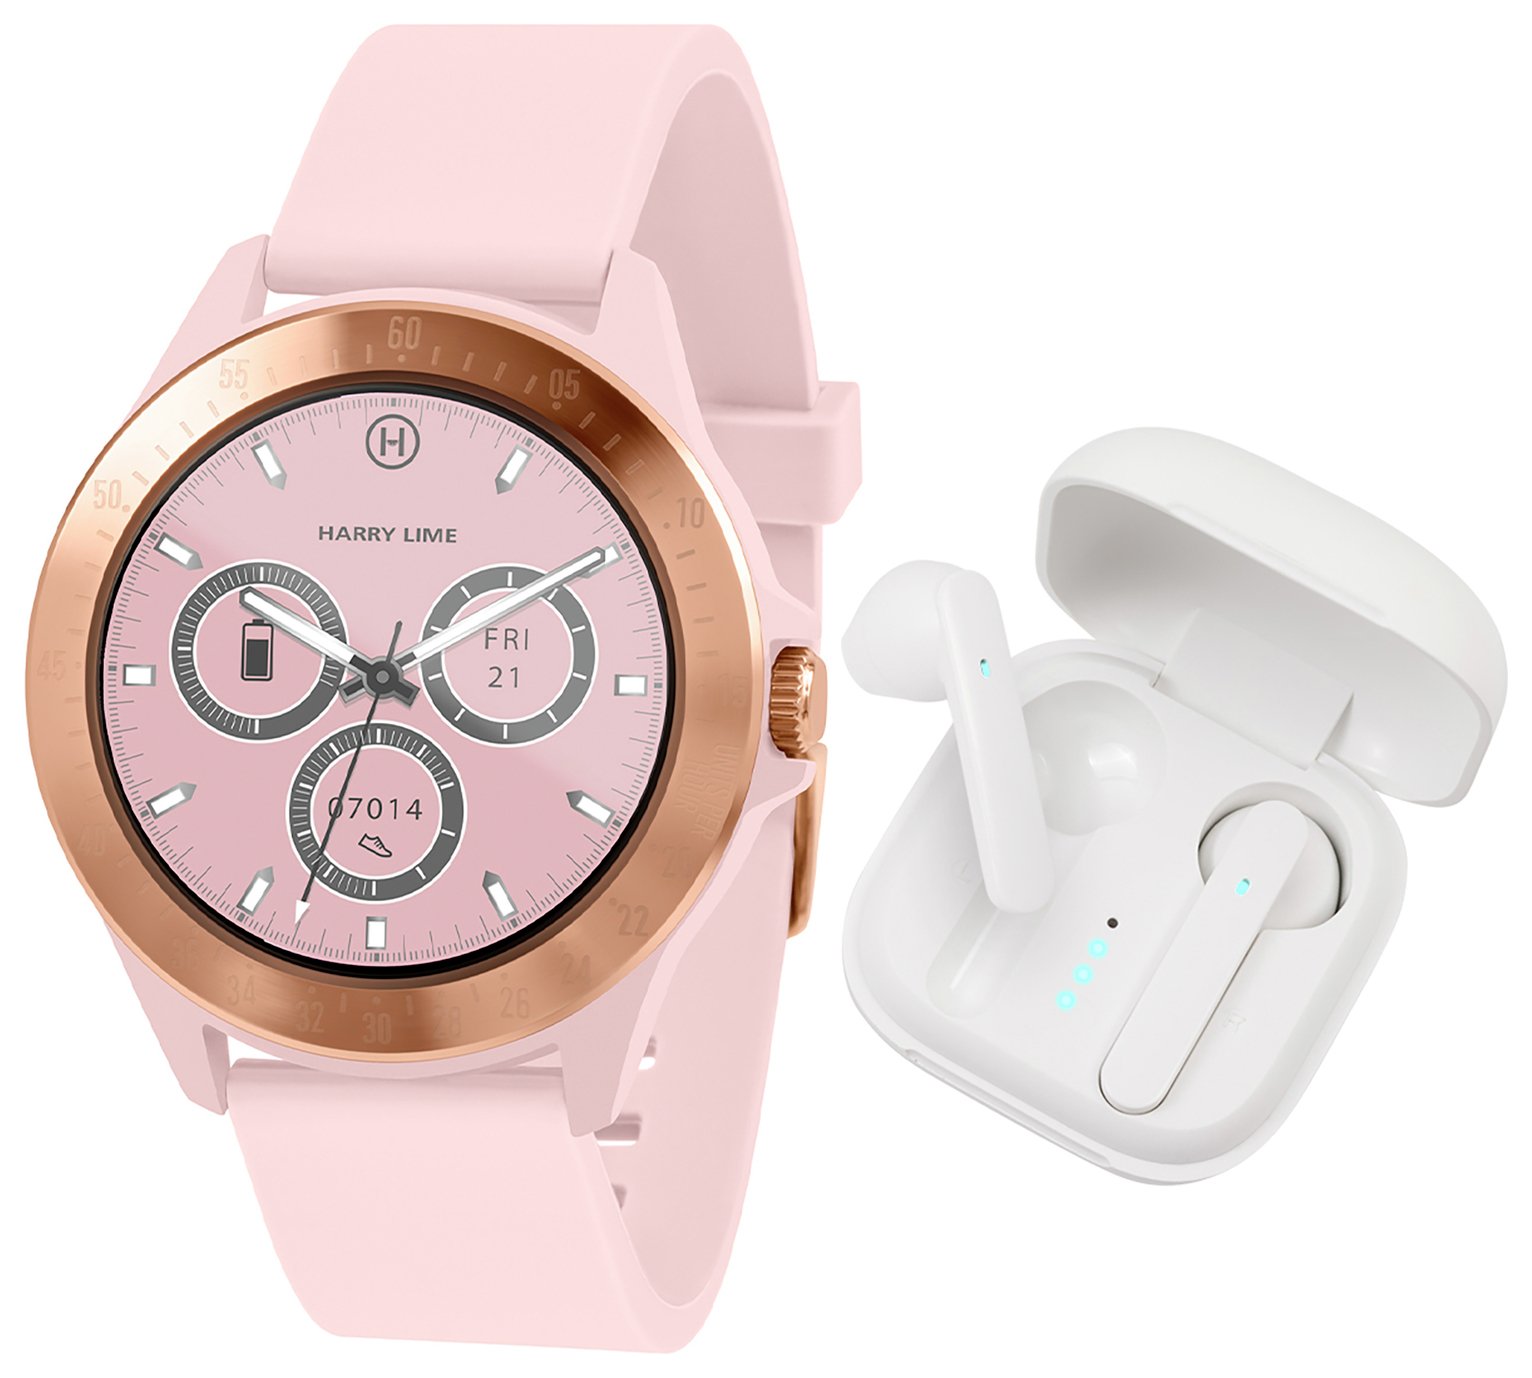 Harry Lime Pink Smart Watch and Ear Pod Set